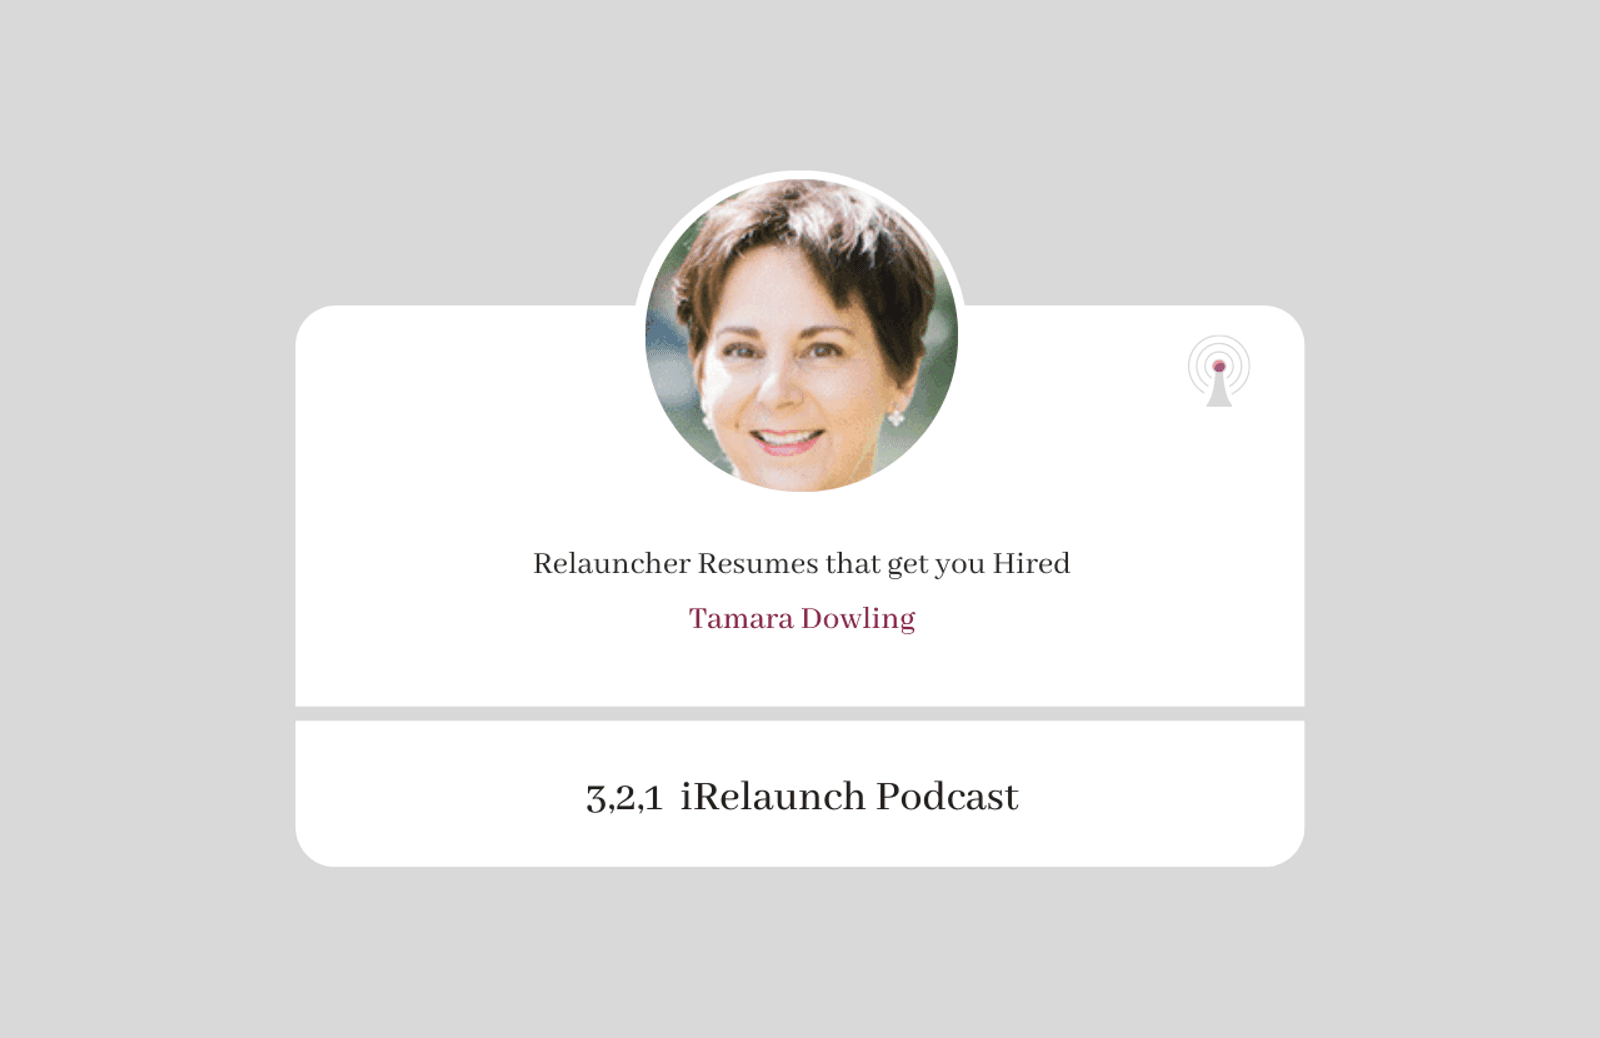 3, 2, 1 iRelaunch Podcast Thumbnail for Episode #14 with Tamara Dowling's headshot. The episode's title is: "Relauncher Resumes that get you Hired."